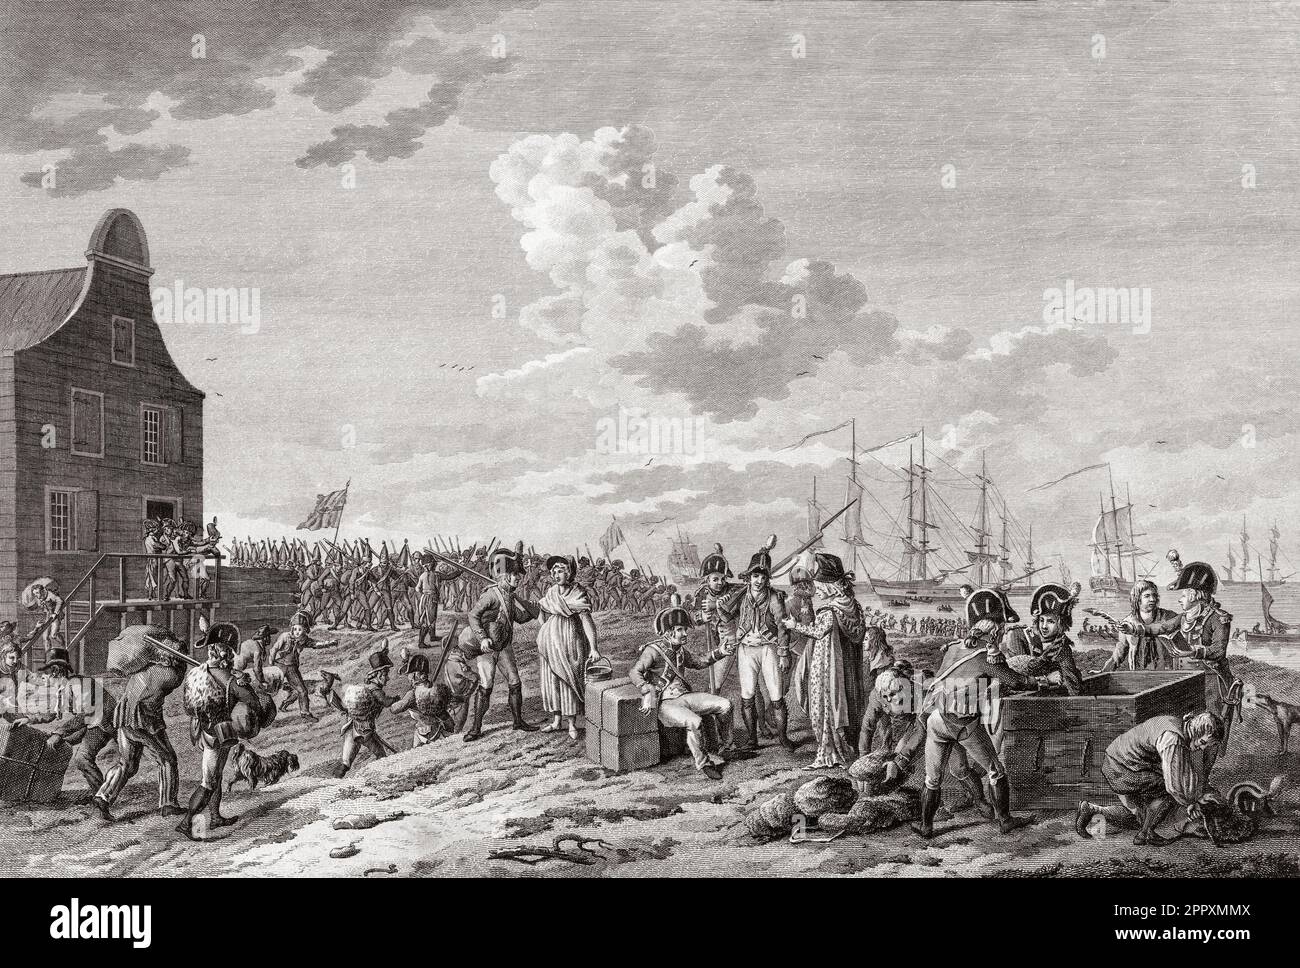 Withdrawal of British and Russian troops from Den Helder, Netherlands, November 1799 at the end of the Anglo-Russian invasion of Holland during the War of the Second Coalition.  After a print by Hendrik Roosing. Stock Photo